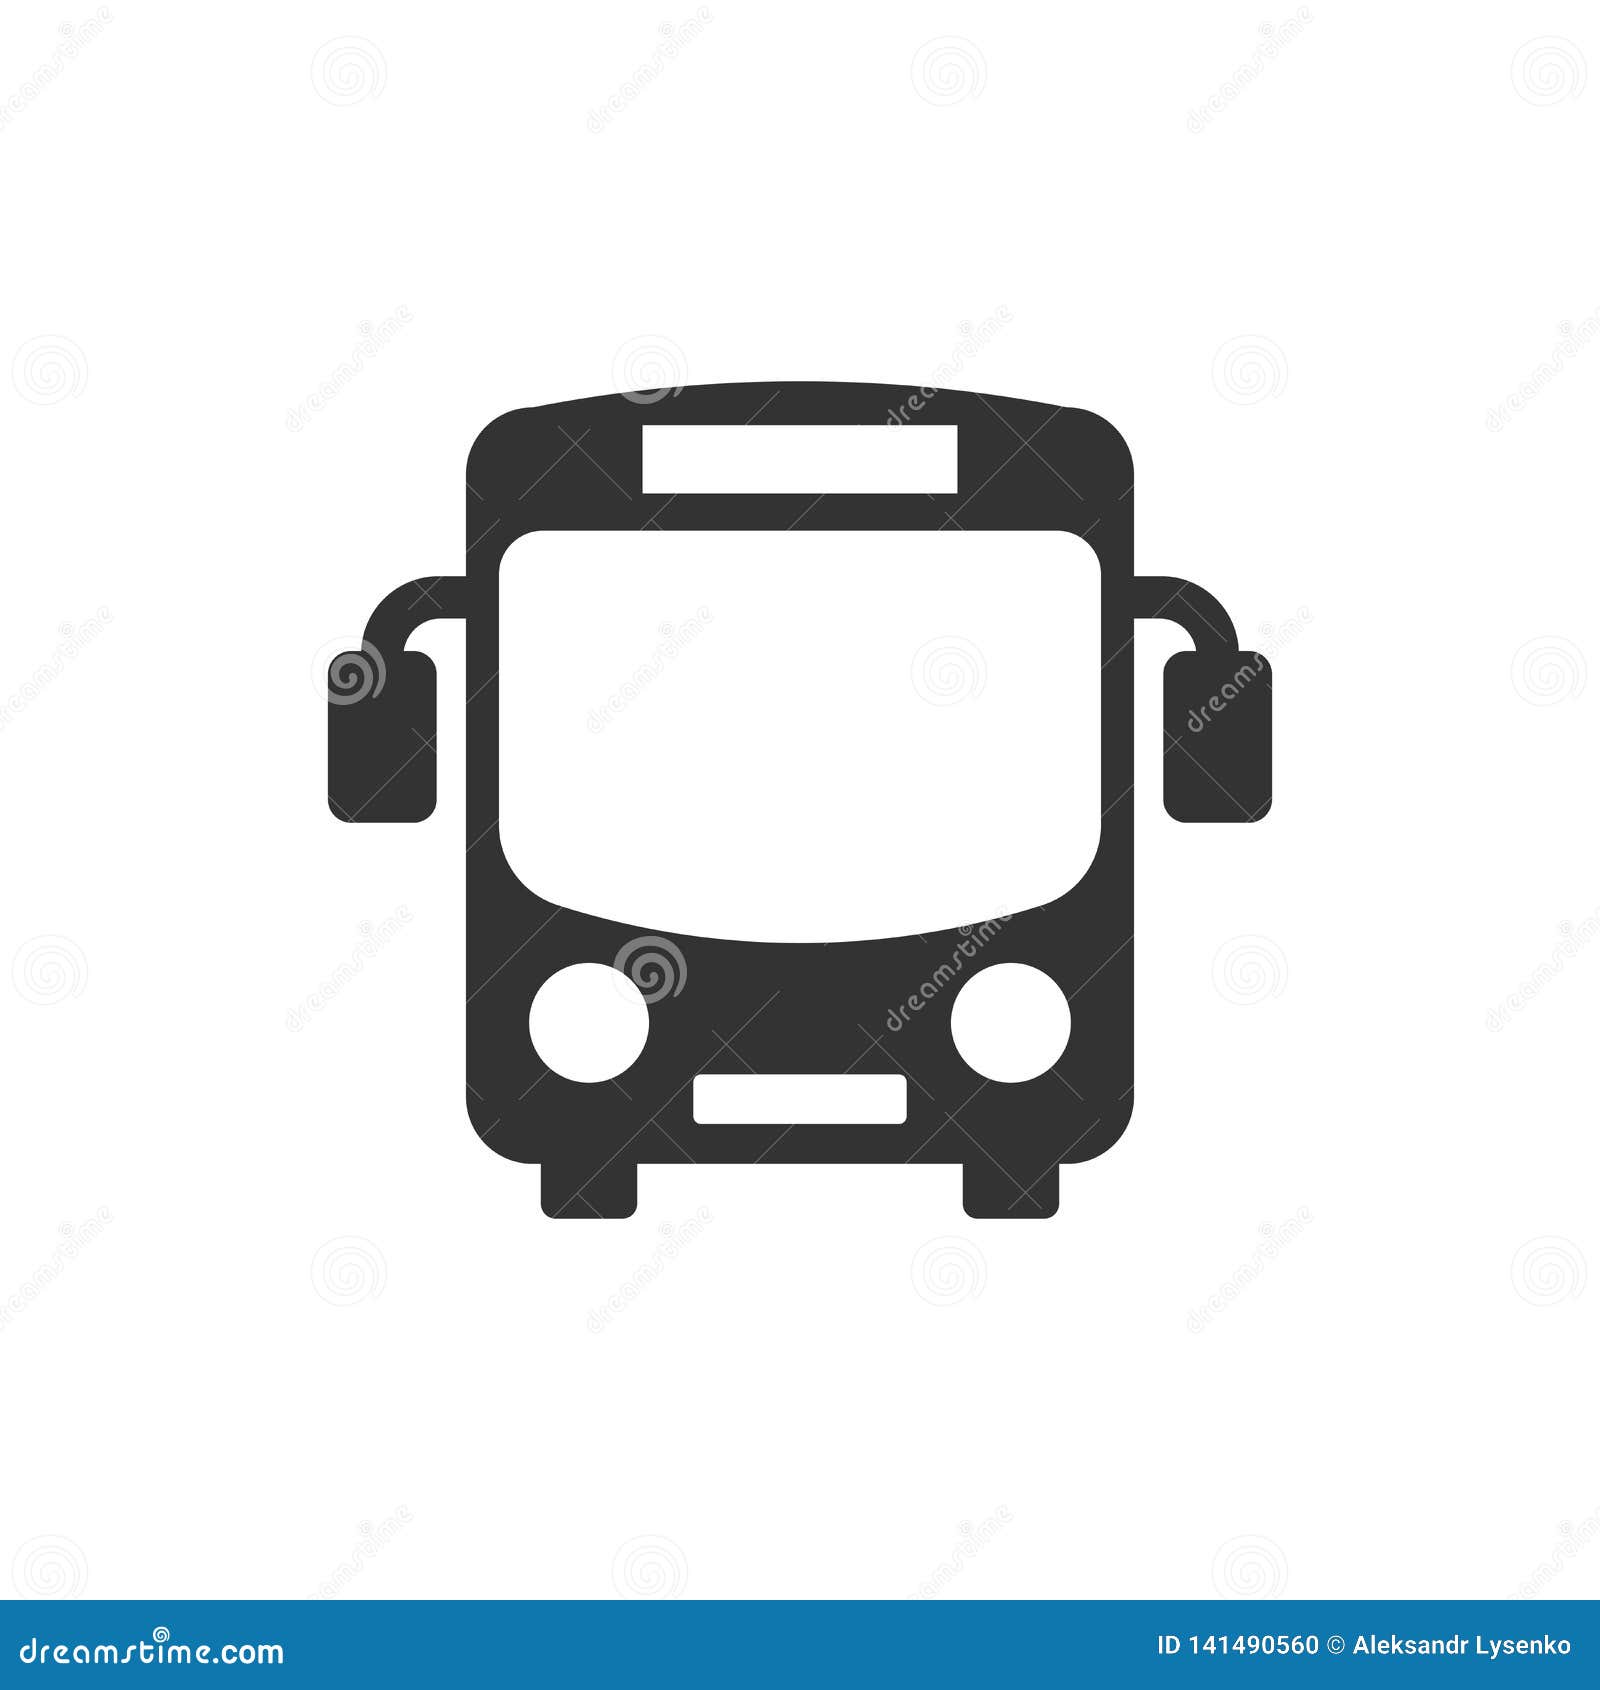 school bus icon in flat style. autobus   on white  background. coach transport business concept